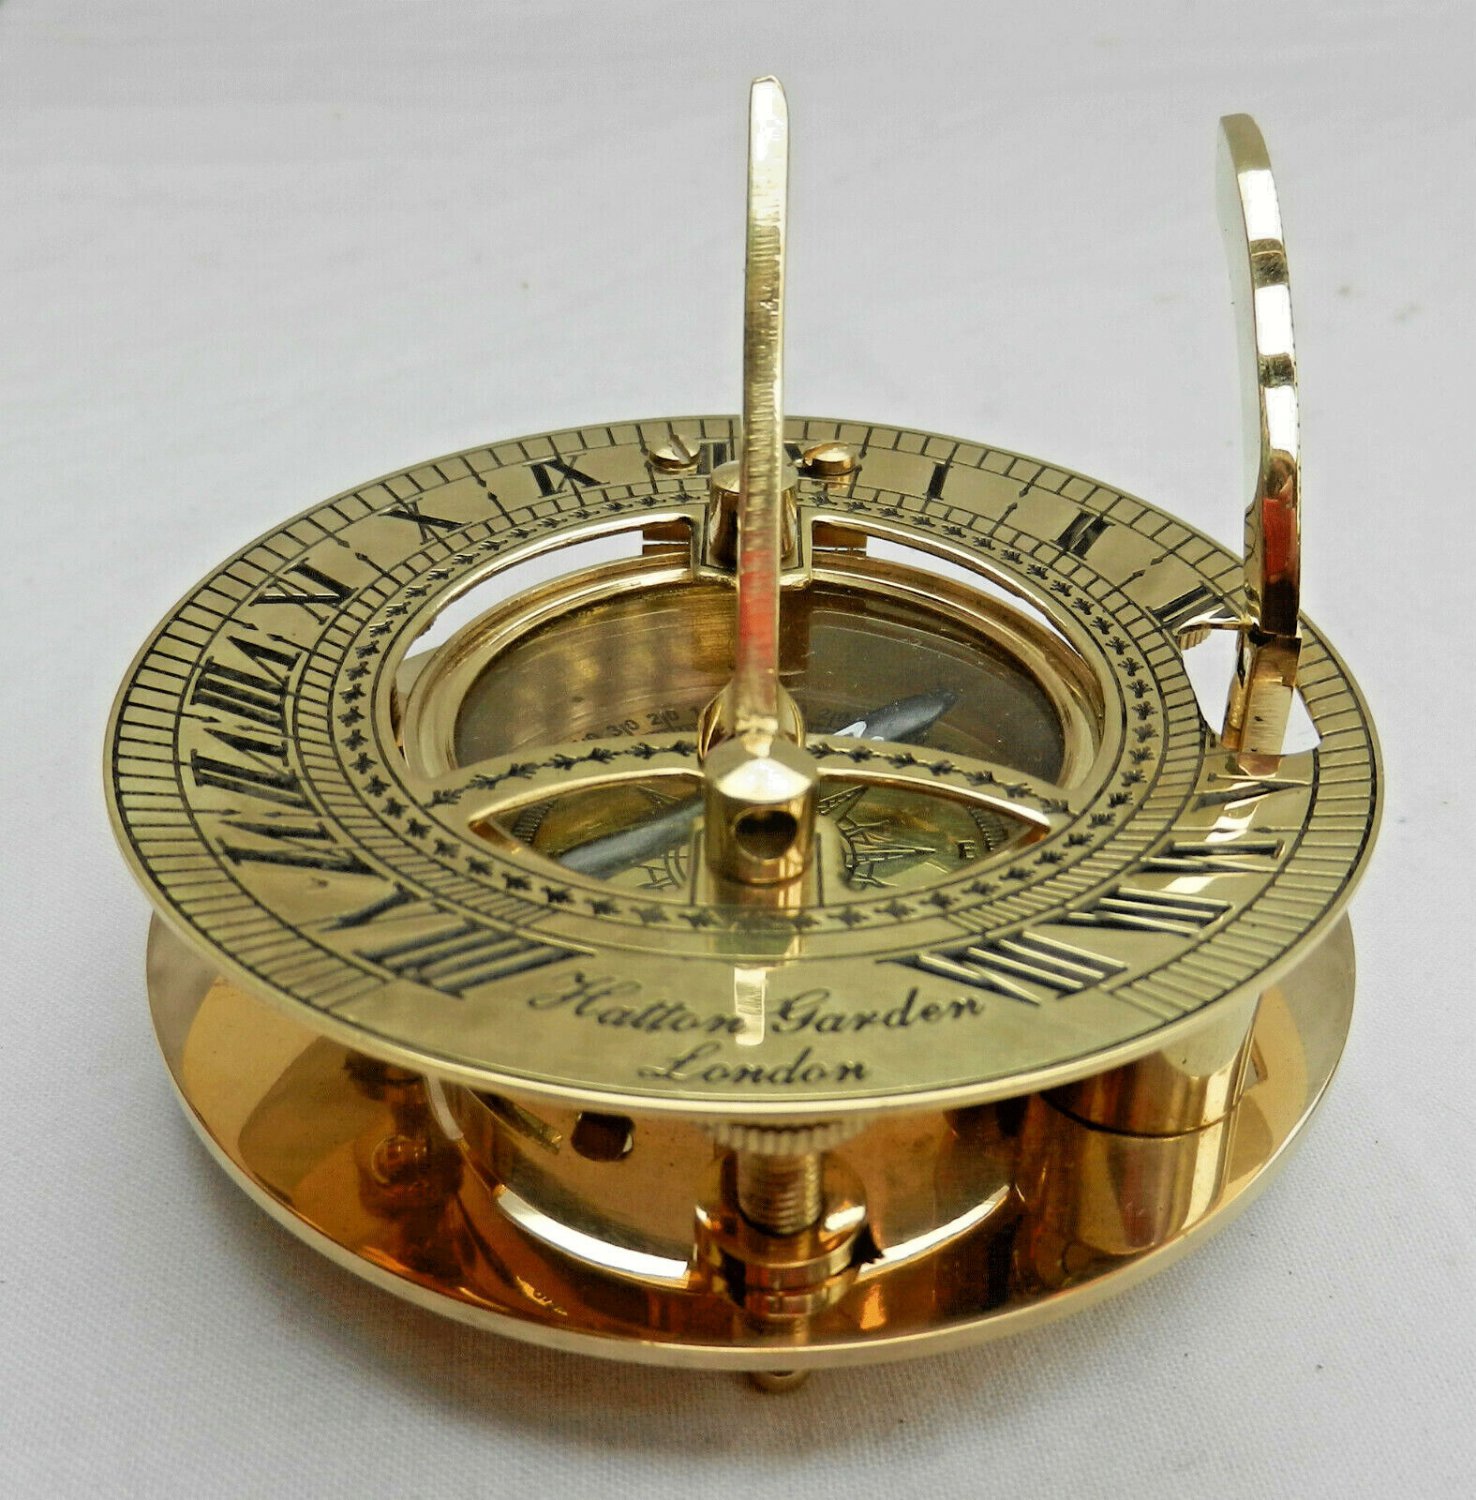 Antique Style Brass Portable Sundial & Compass in a Wooden Box - BNIB